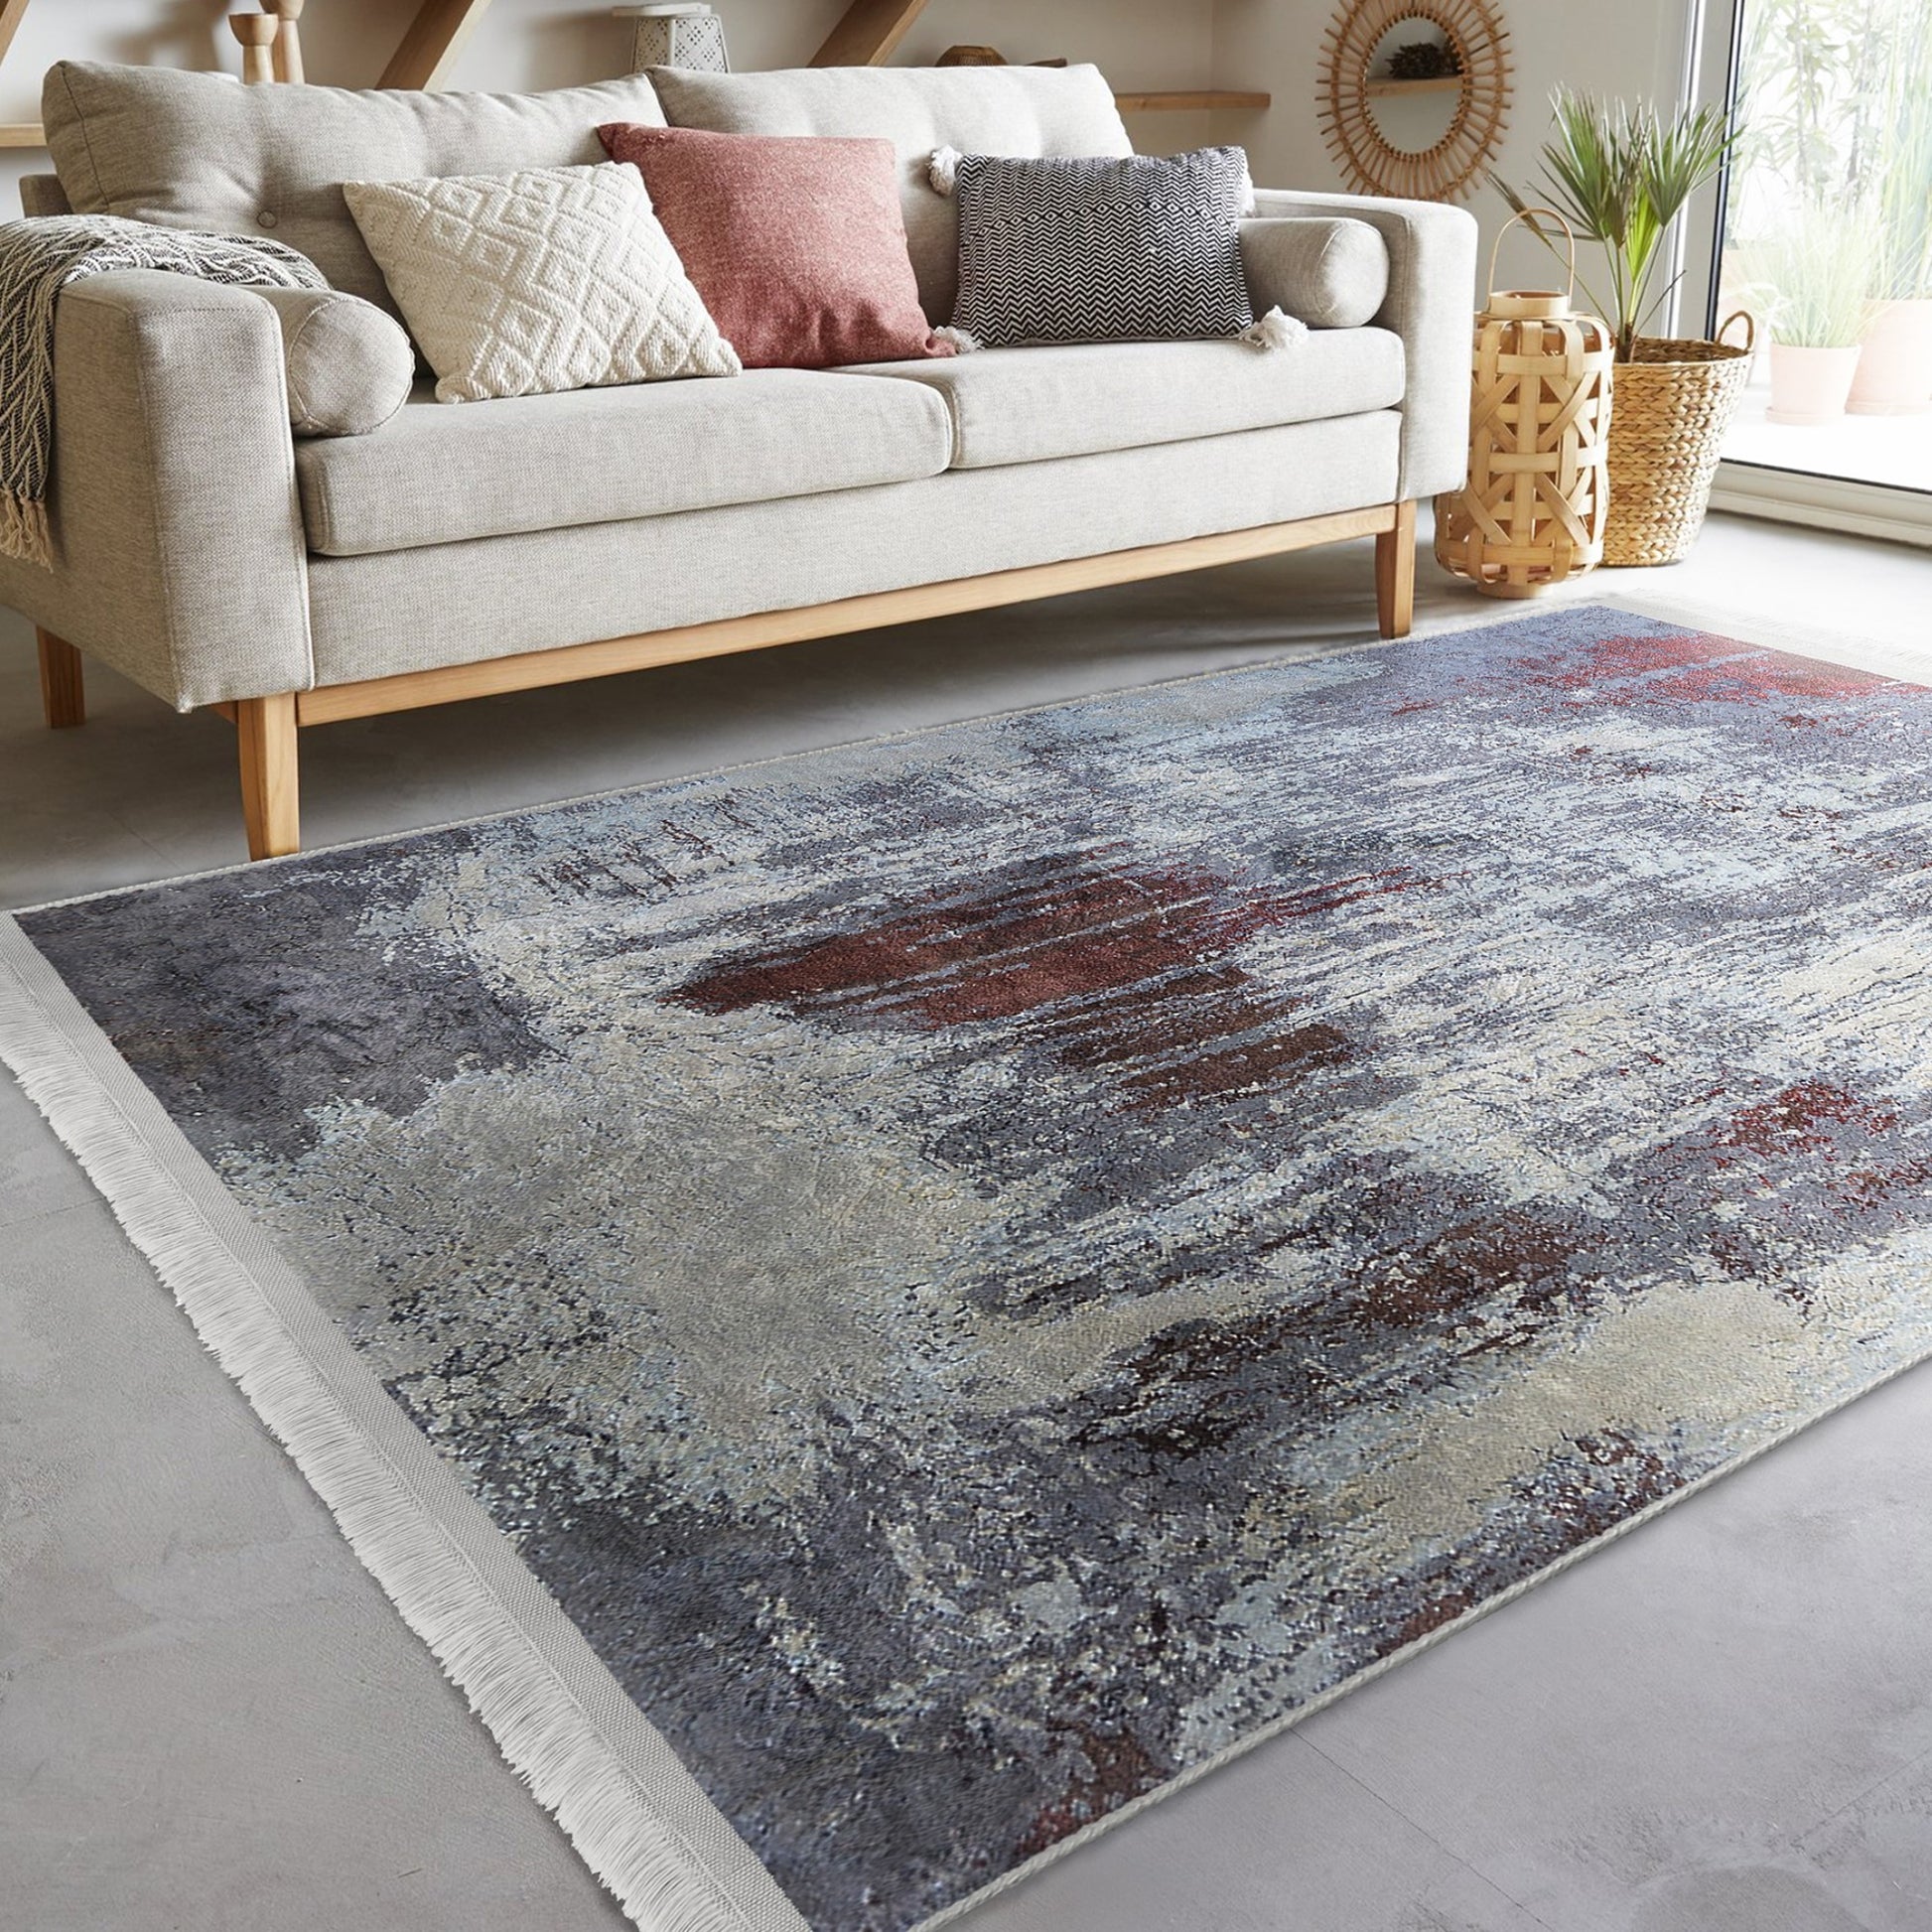 Rustic Decorative Area Rug - Front View